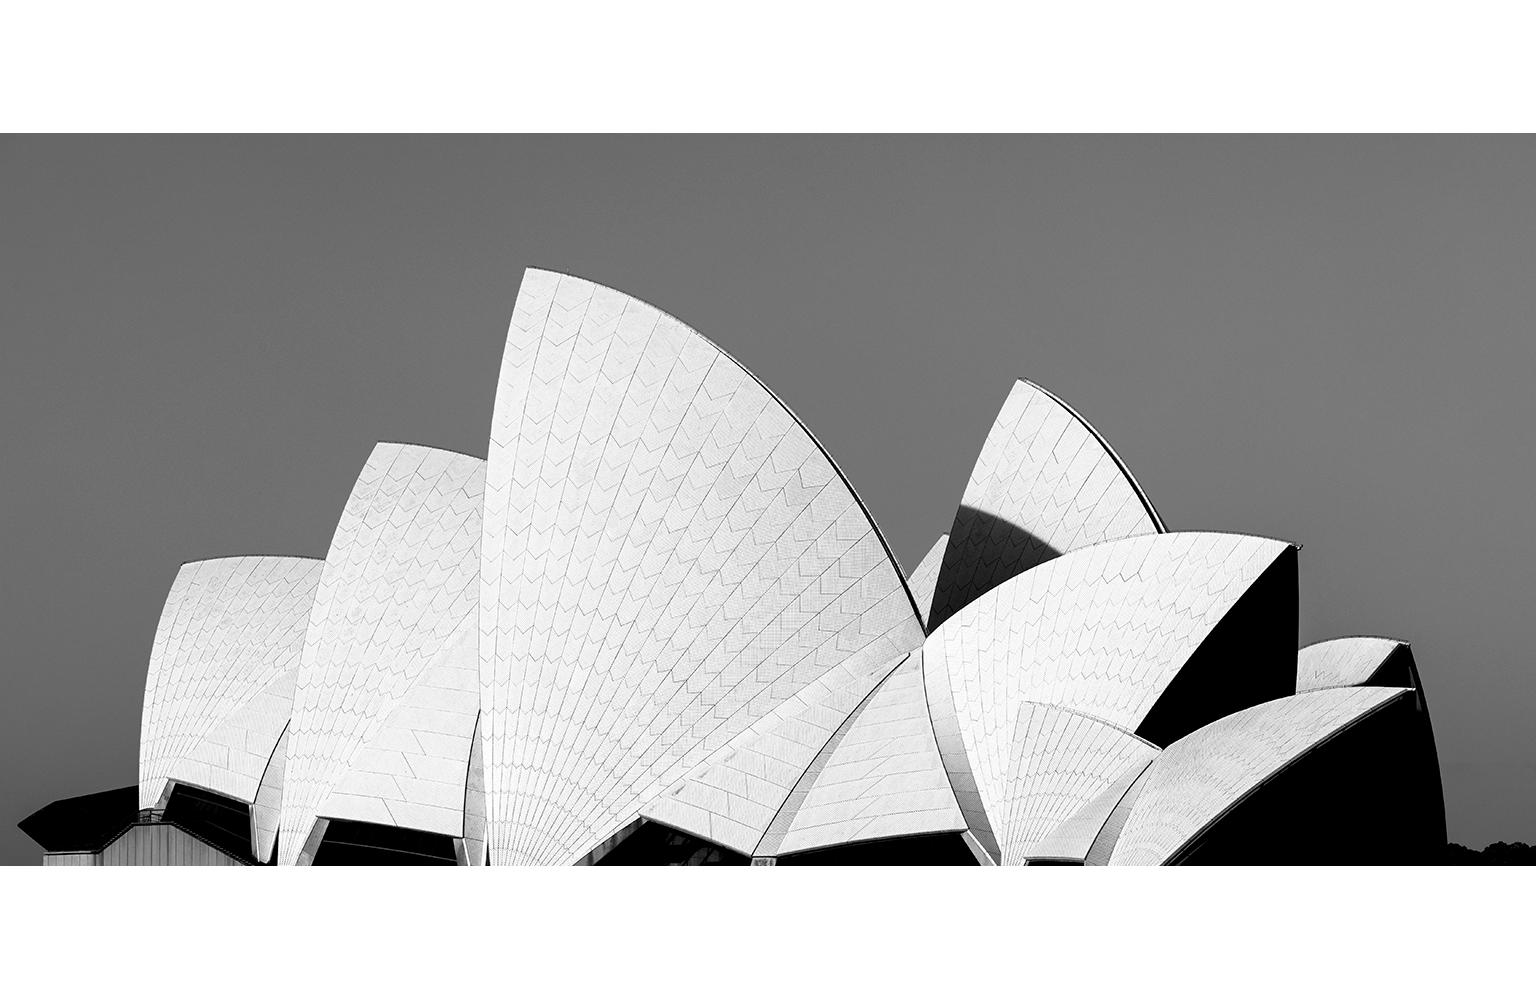  Cosmo Condina Black and White Photograph - Architectural Detail of the Sydney Opera House. Australia,  2019